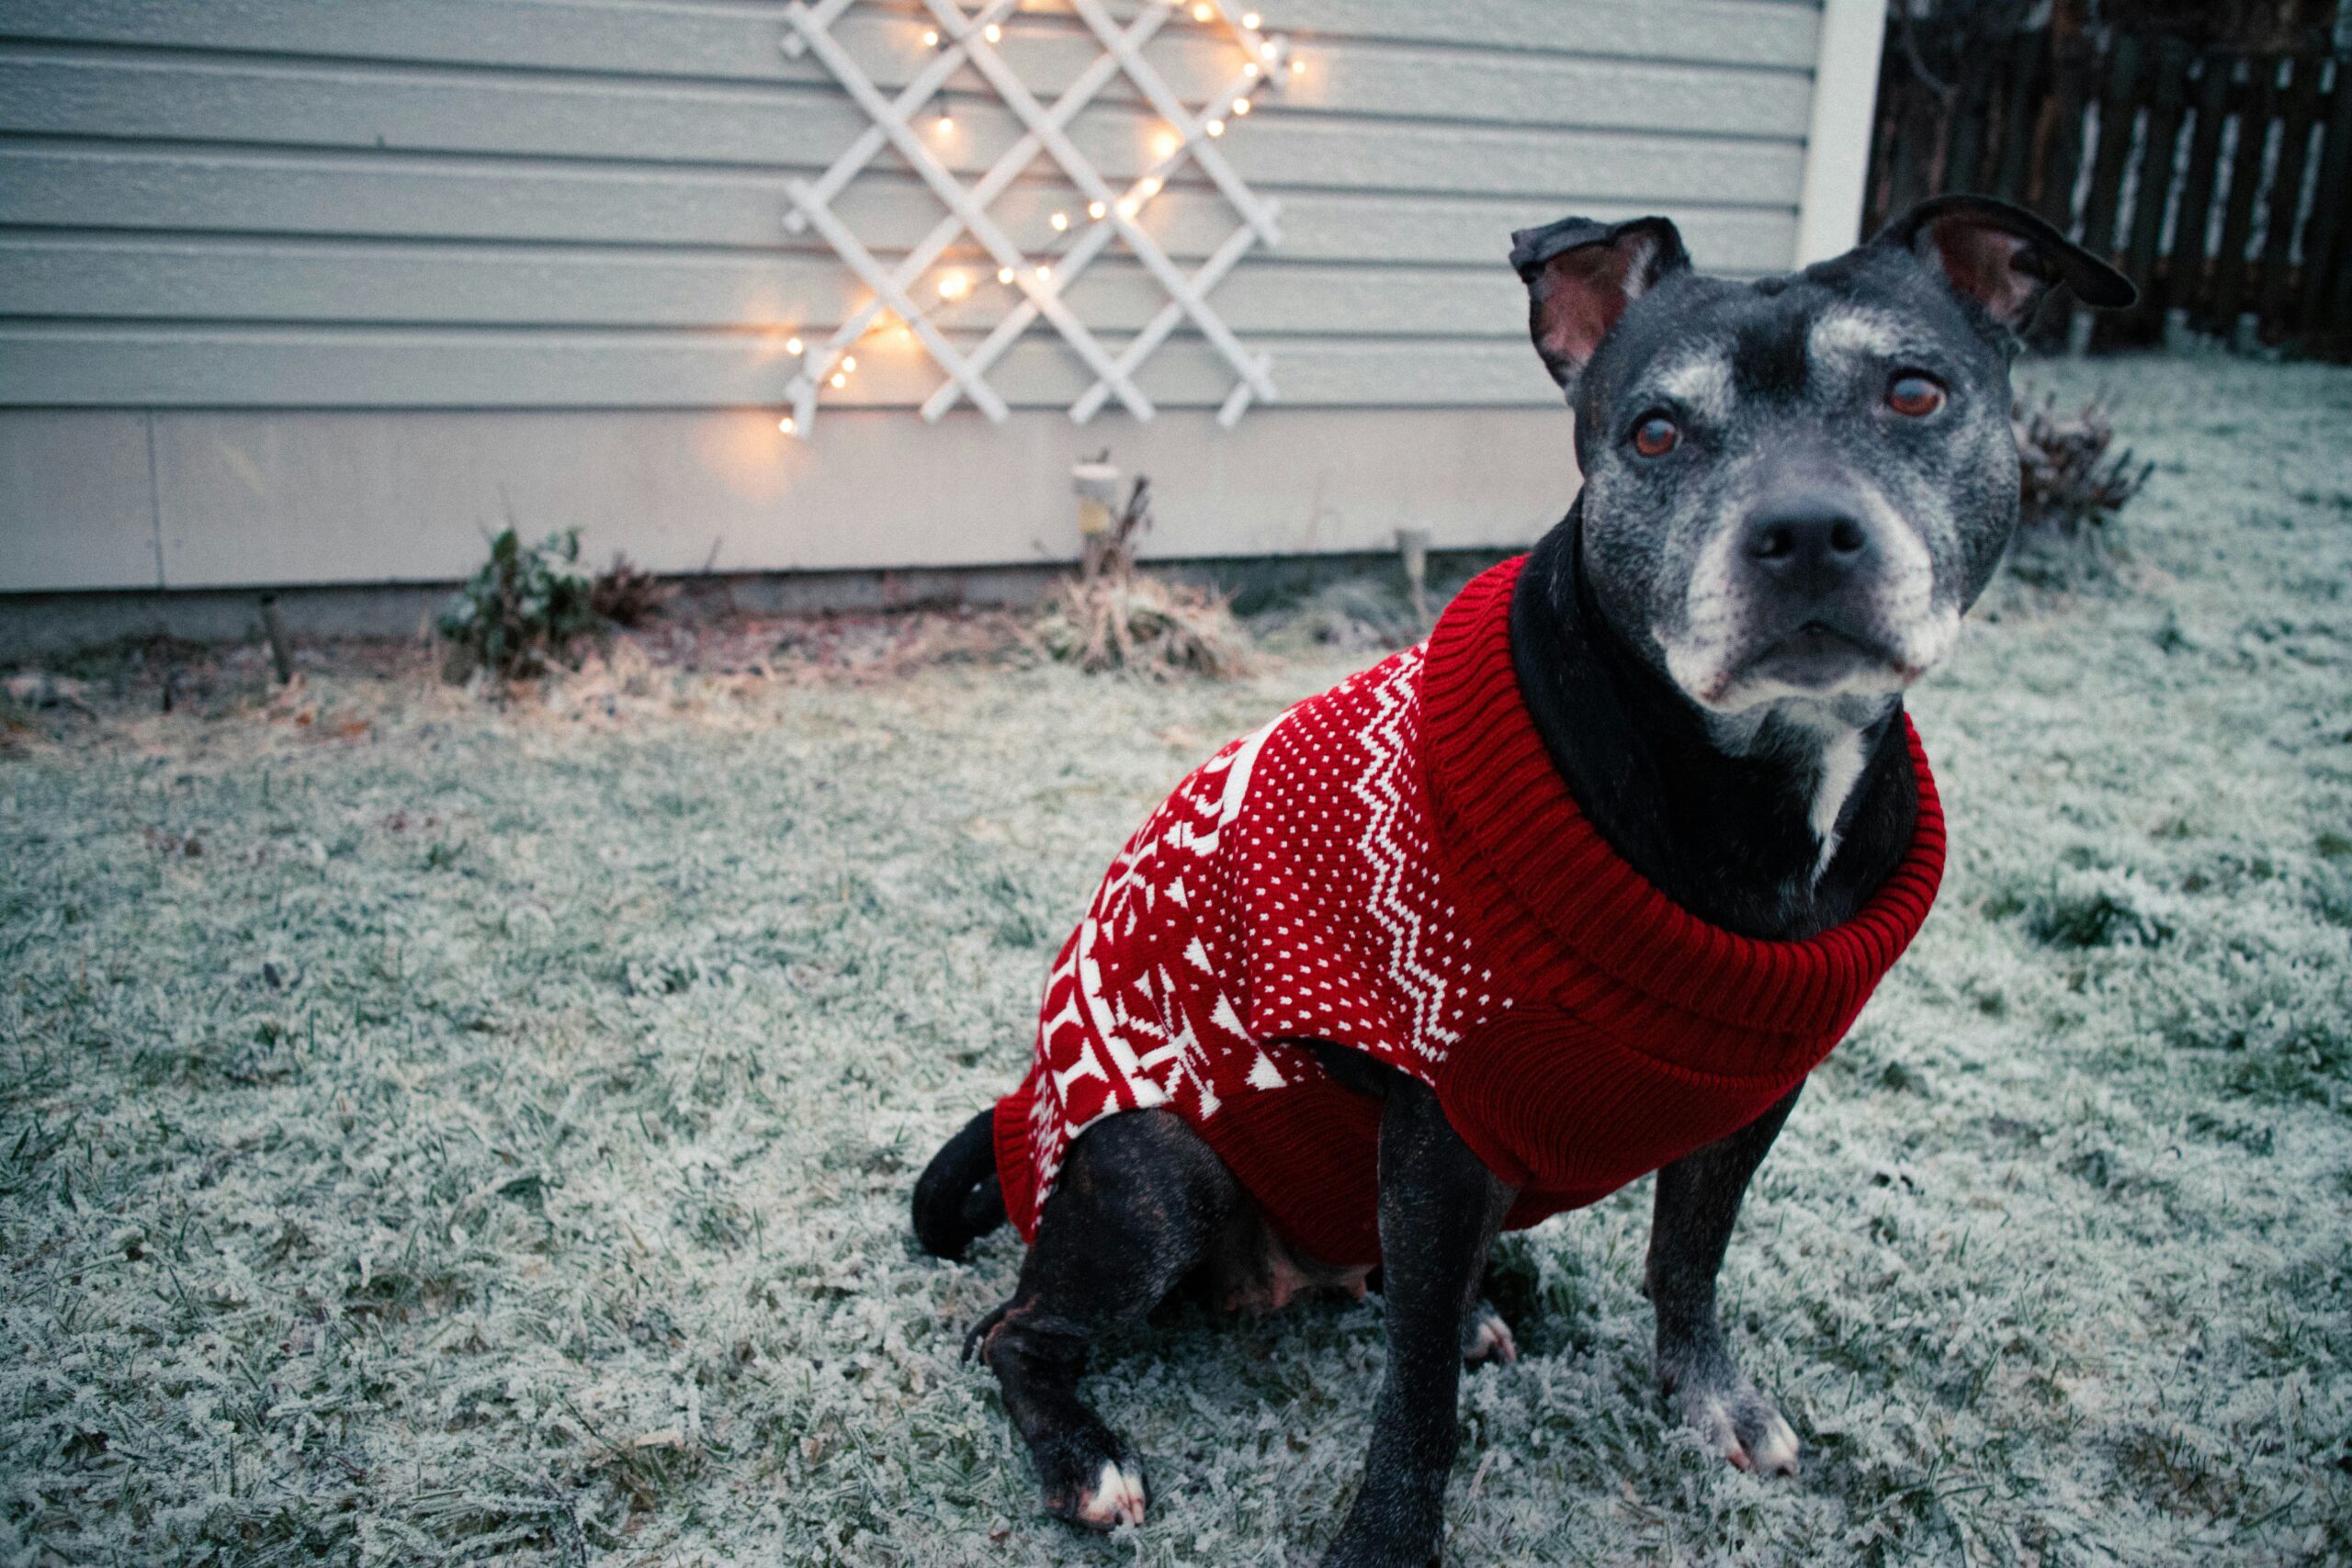 A black dog with a grey muzzle wearing a red Christmas sweater